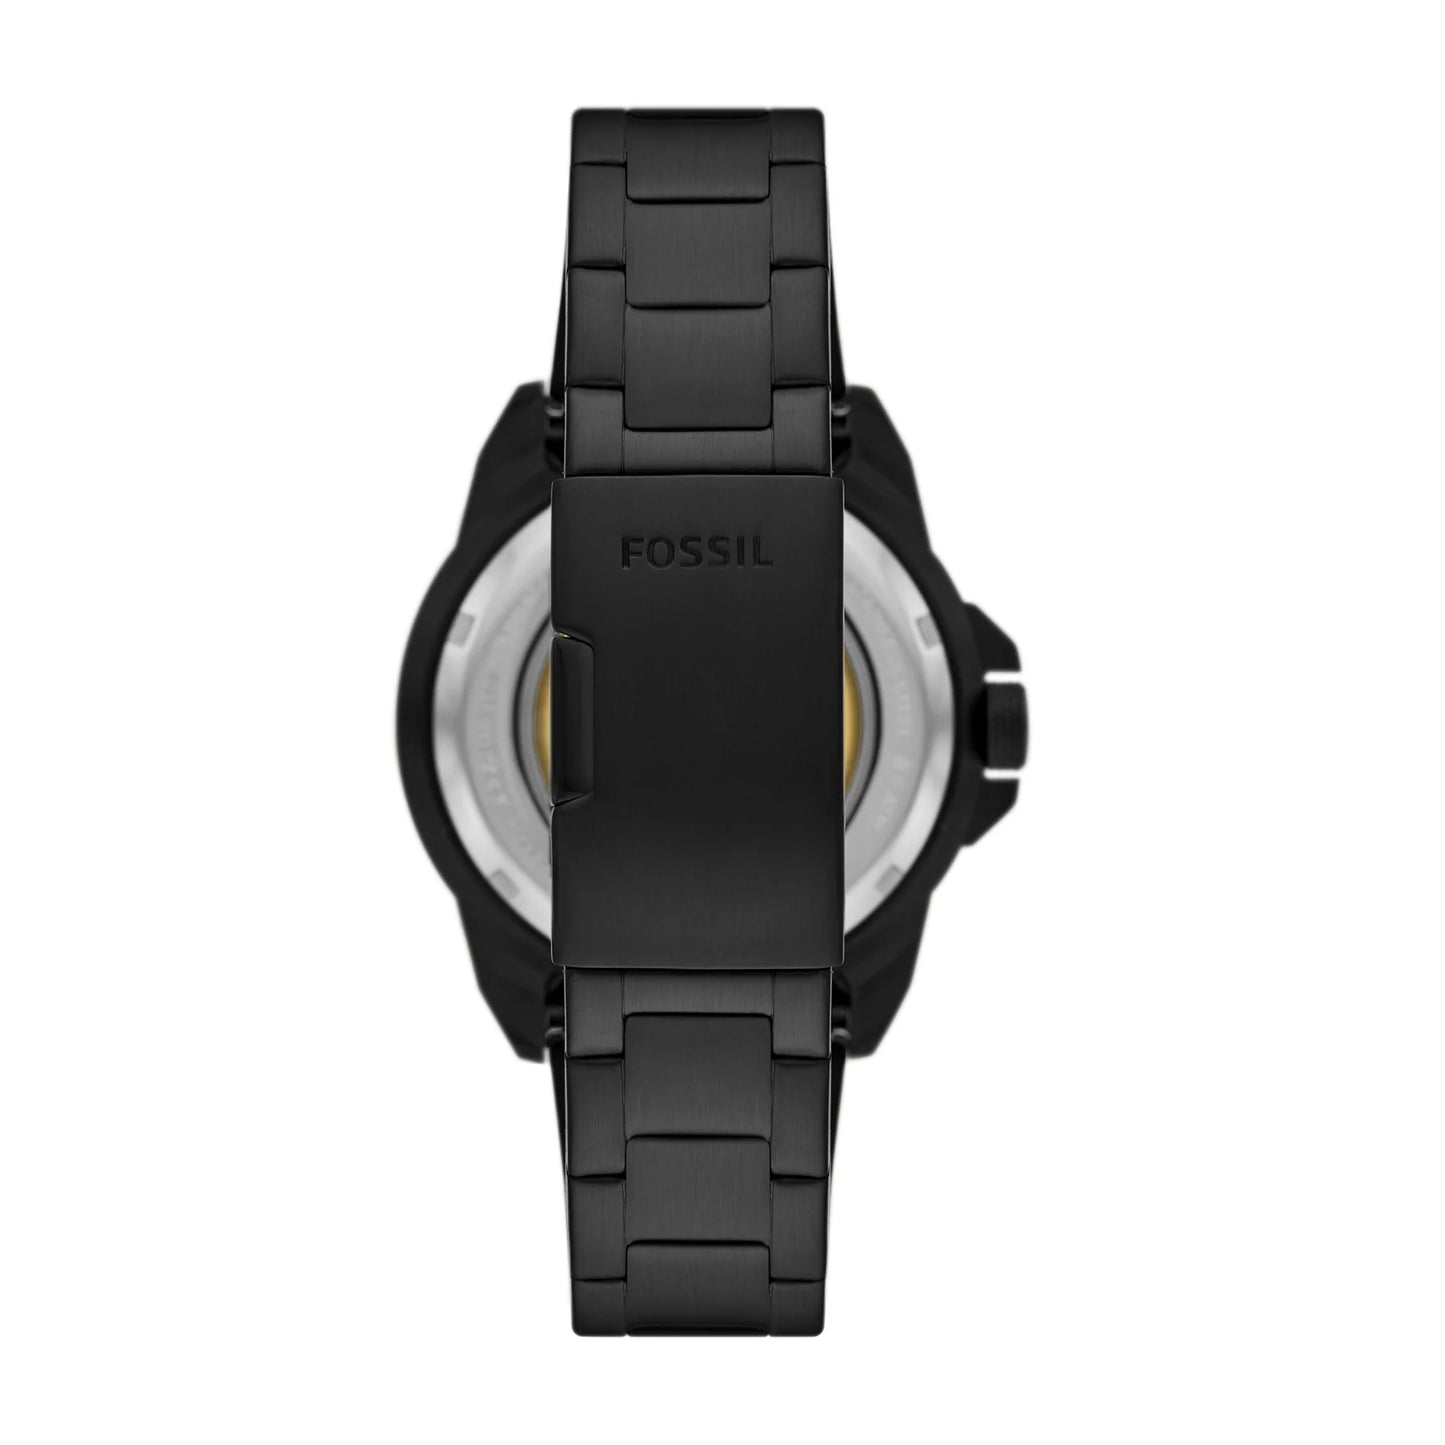 Bronson Automatic Black Stainless Steel Watch